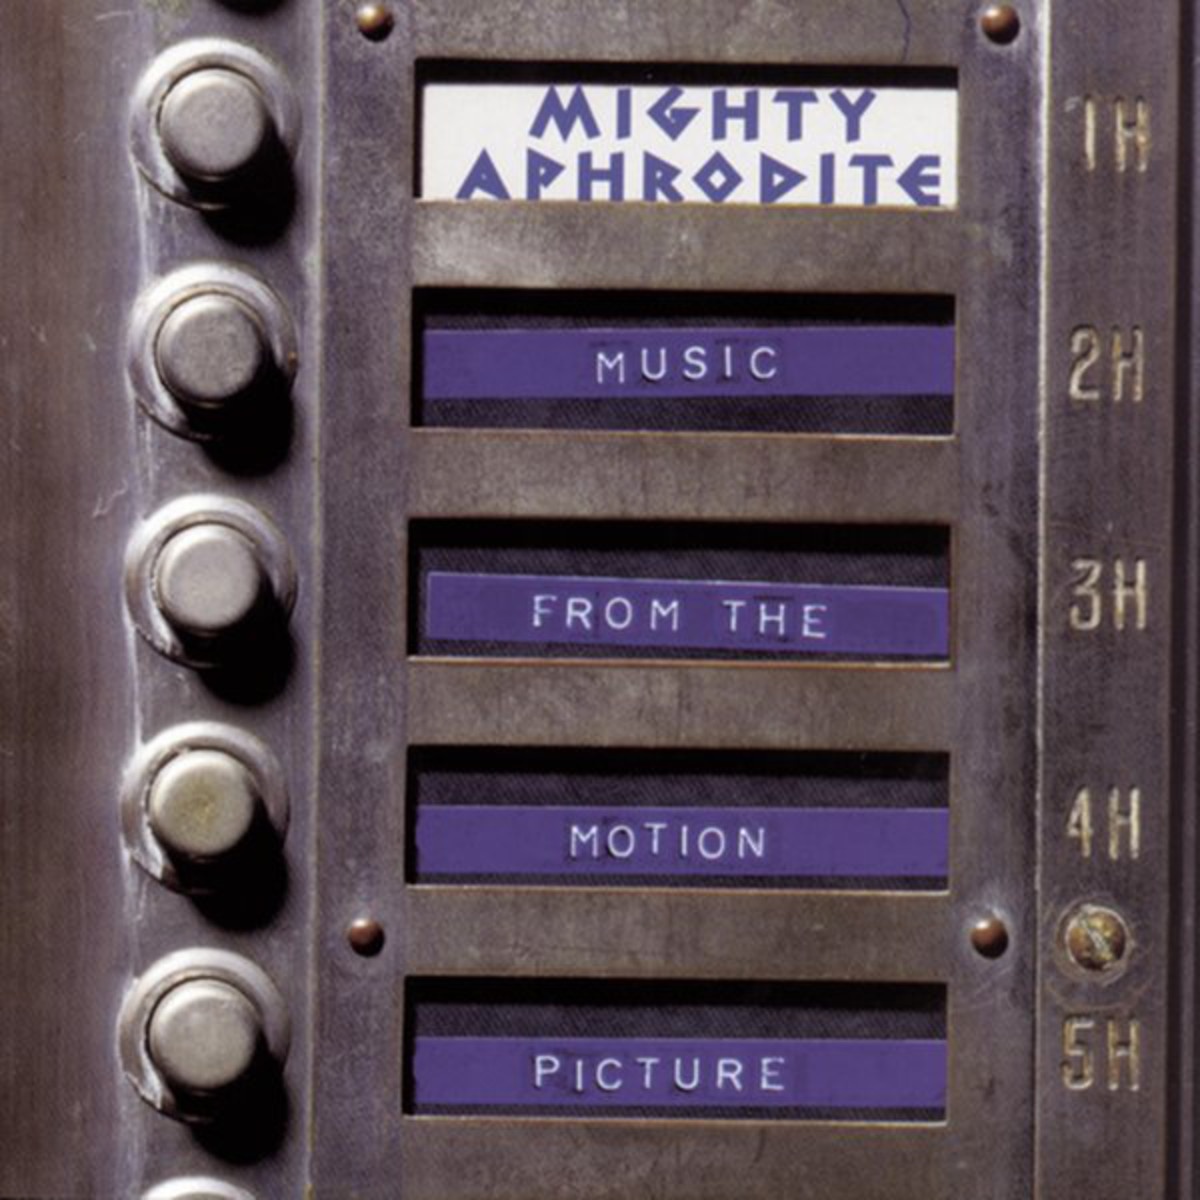 Mighty Aphrodite (Music From The Motion Picture)